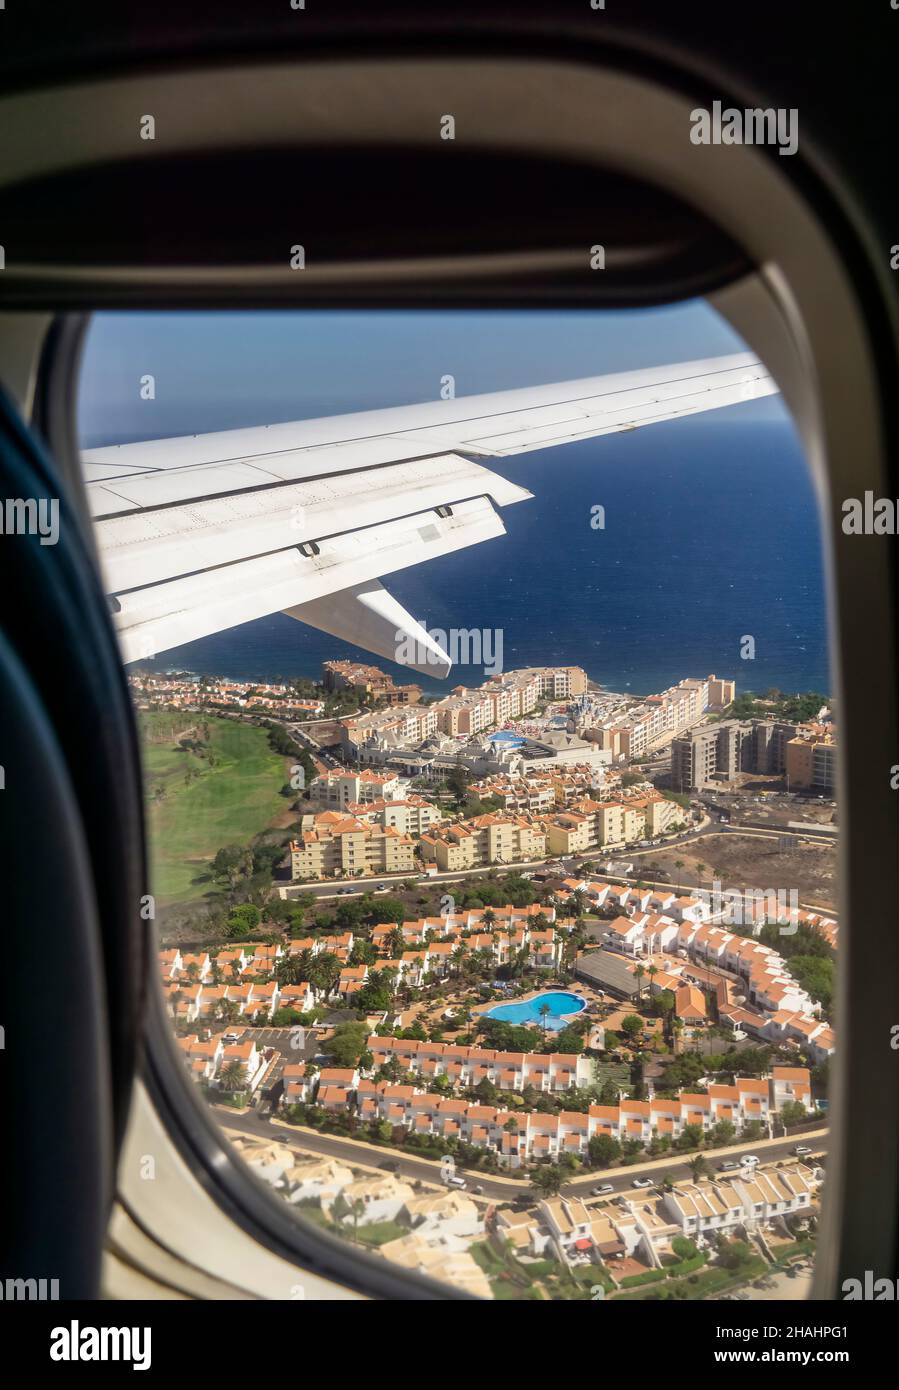 Canary Islands, Tenerife South 25.09.2021: Landing approach to the airport Aeropuerto de Tenerife Sur Reina Sofía. View over the Wyndham Residences, t Stock Photo